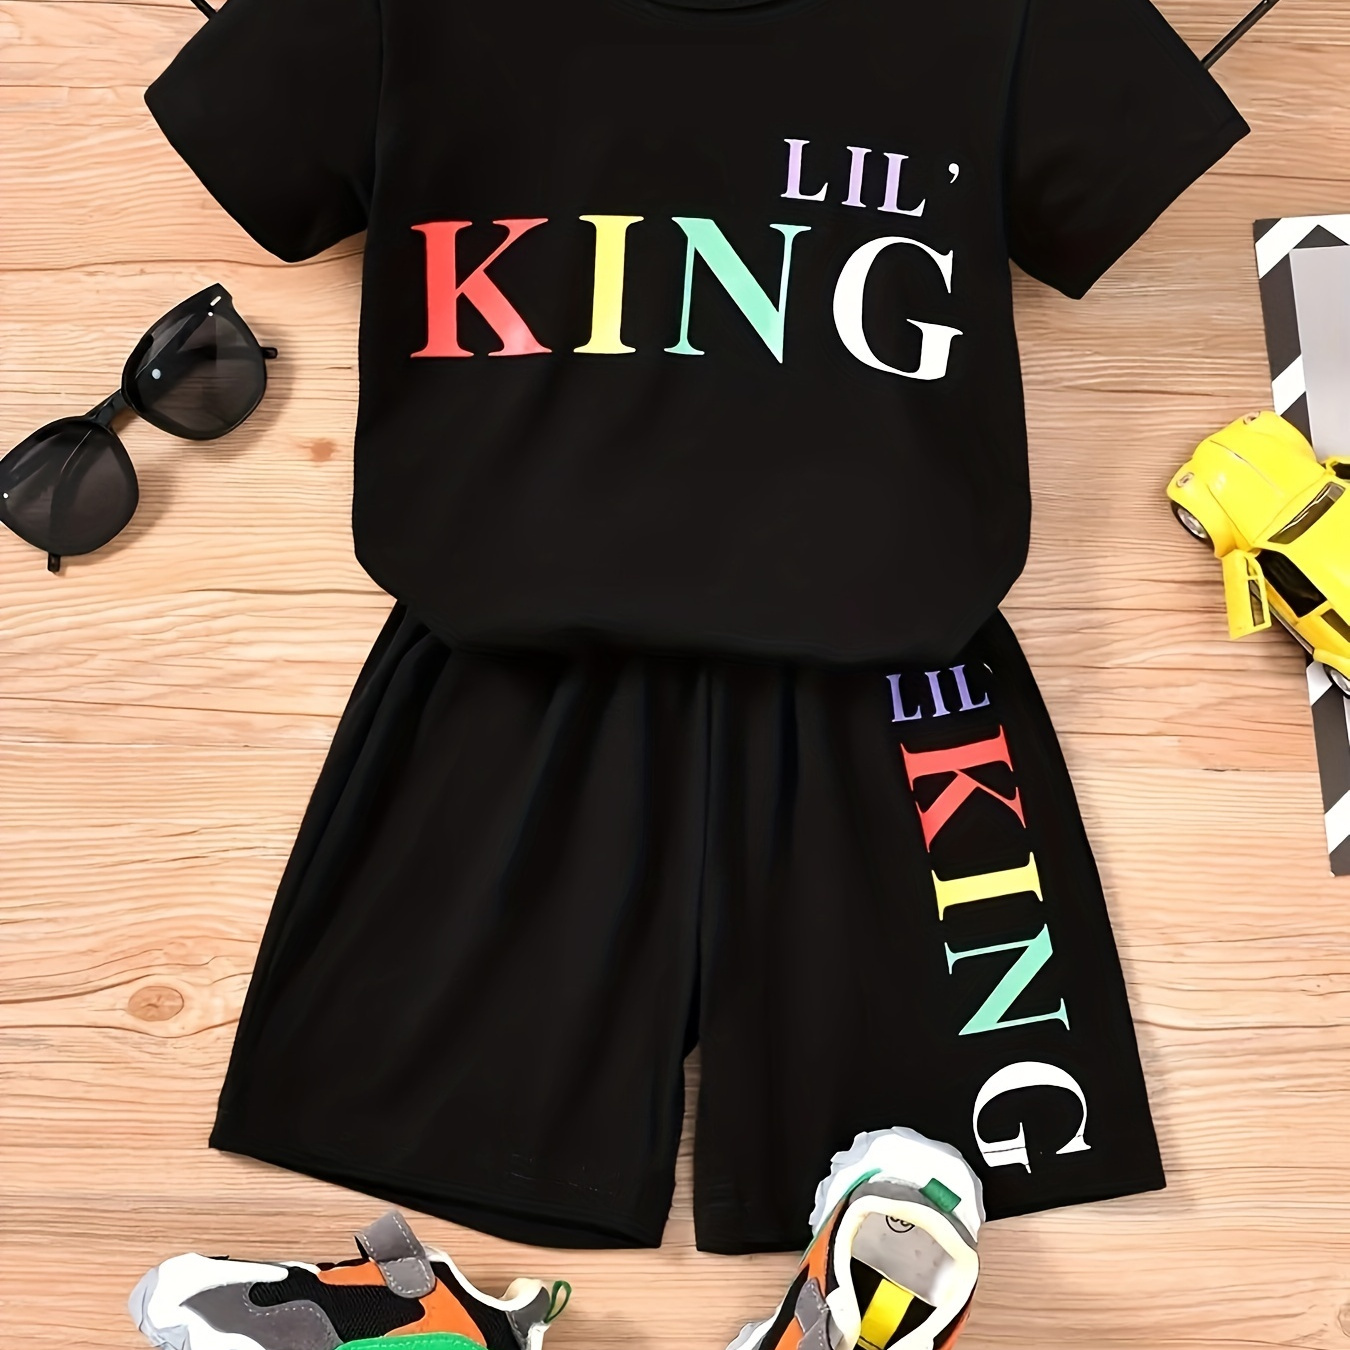 

2pcs Toddler Boy's Lil King Colorful Letter Print Outfit, Tee Top & Shorts Set, Toddler Summer Clothing